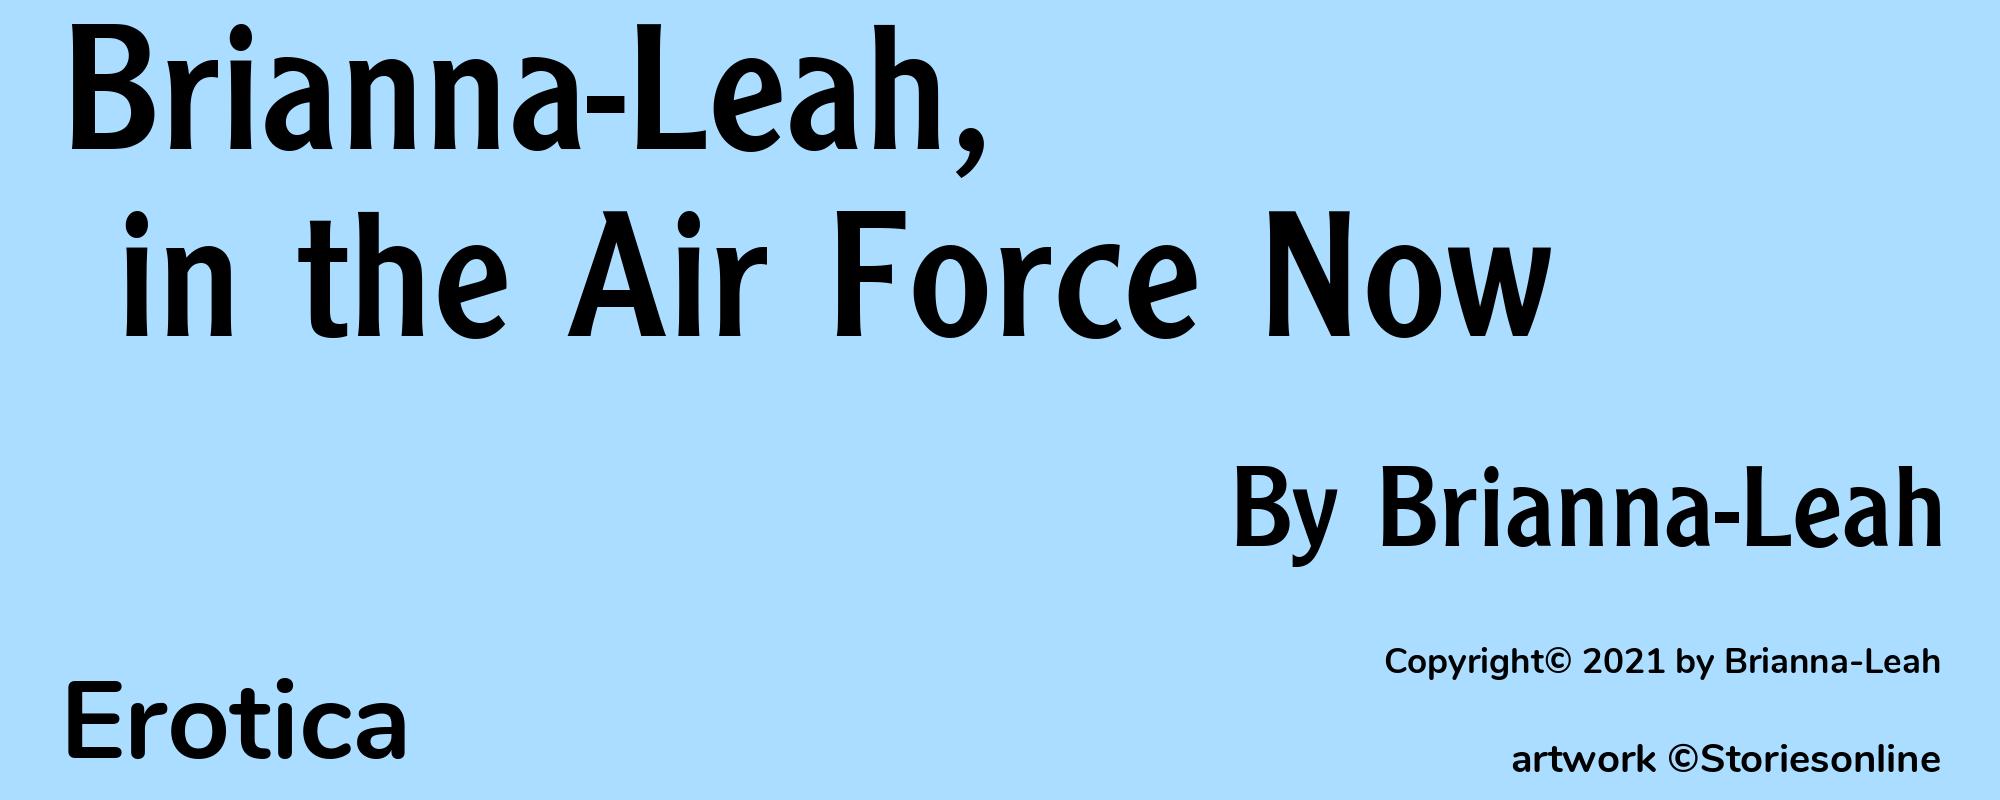 Brianna-Leah, in the Air Force Now - Cover